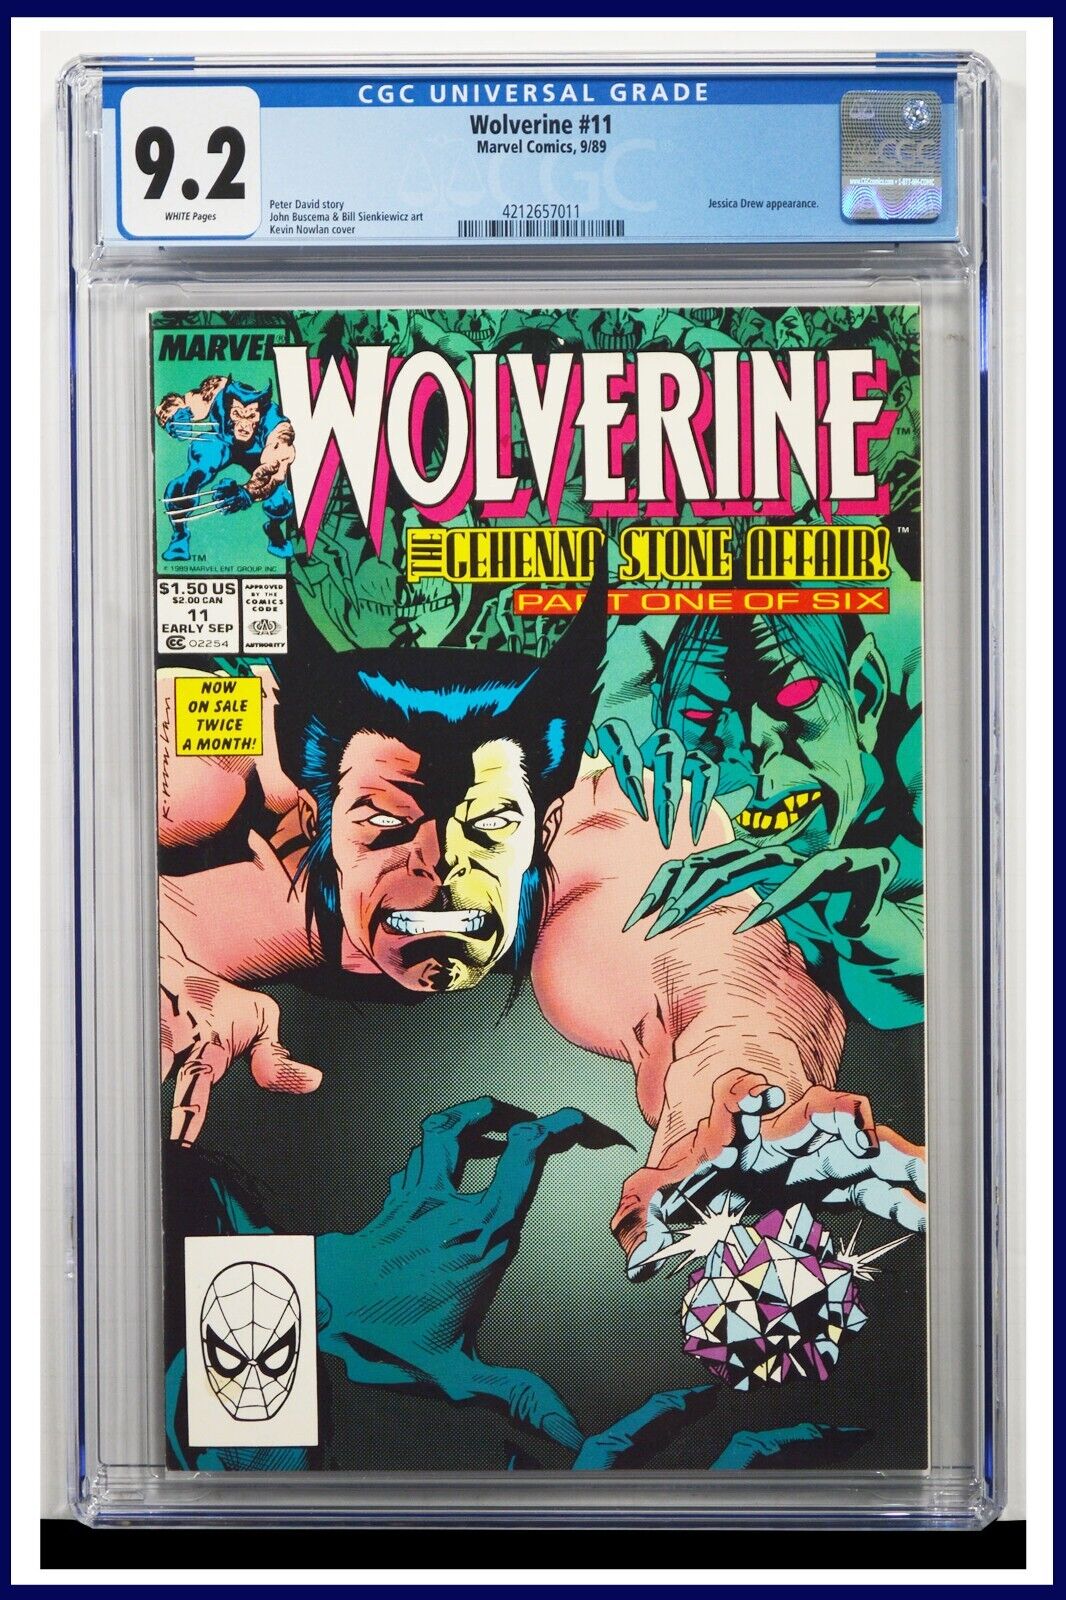 Wolverine #11 CGC Graded 9.2 Marvel September 1989 White Pages Comic Book.